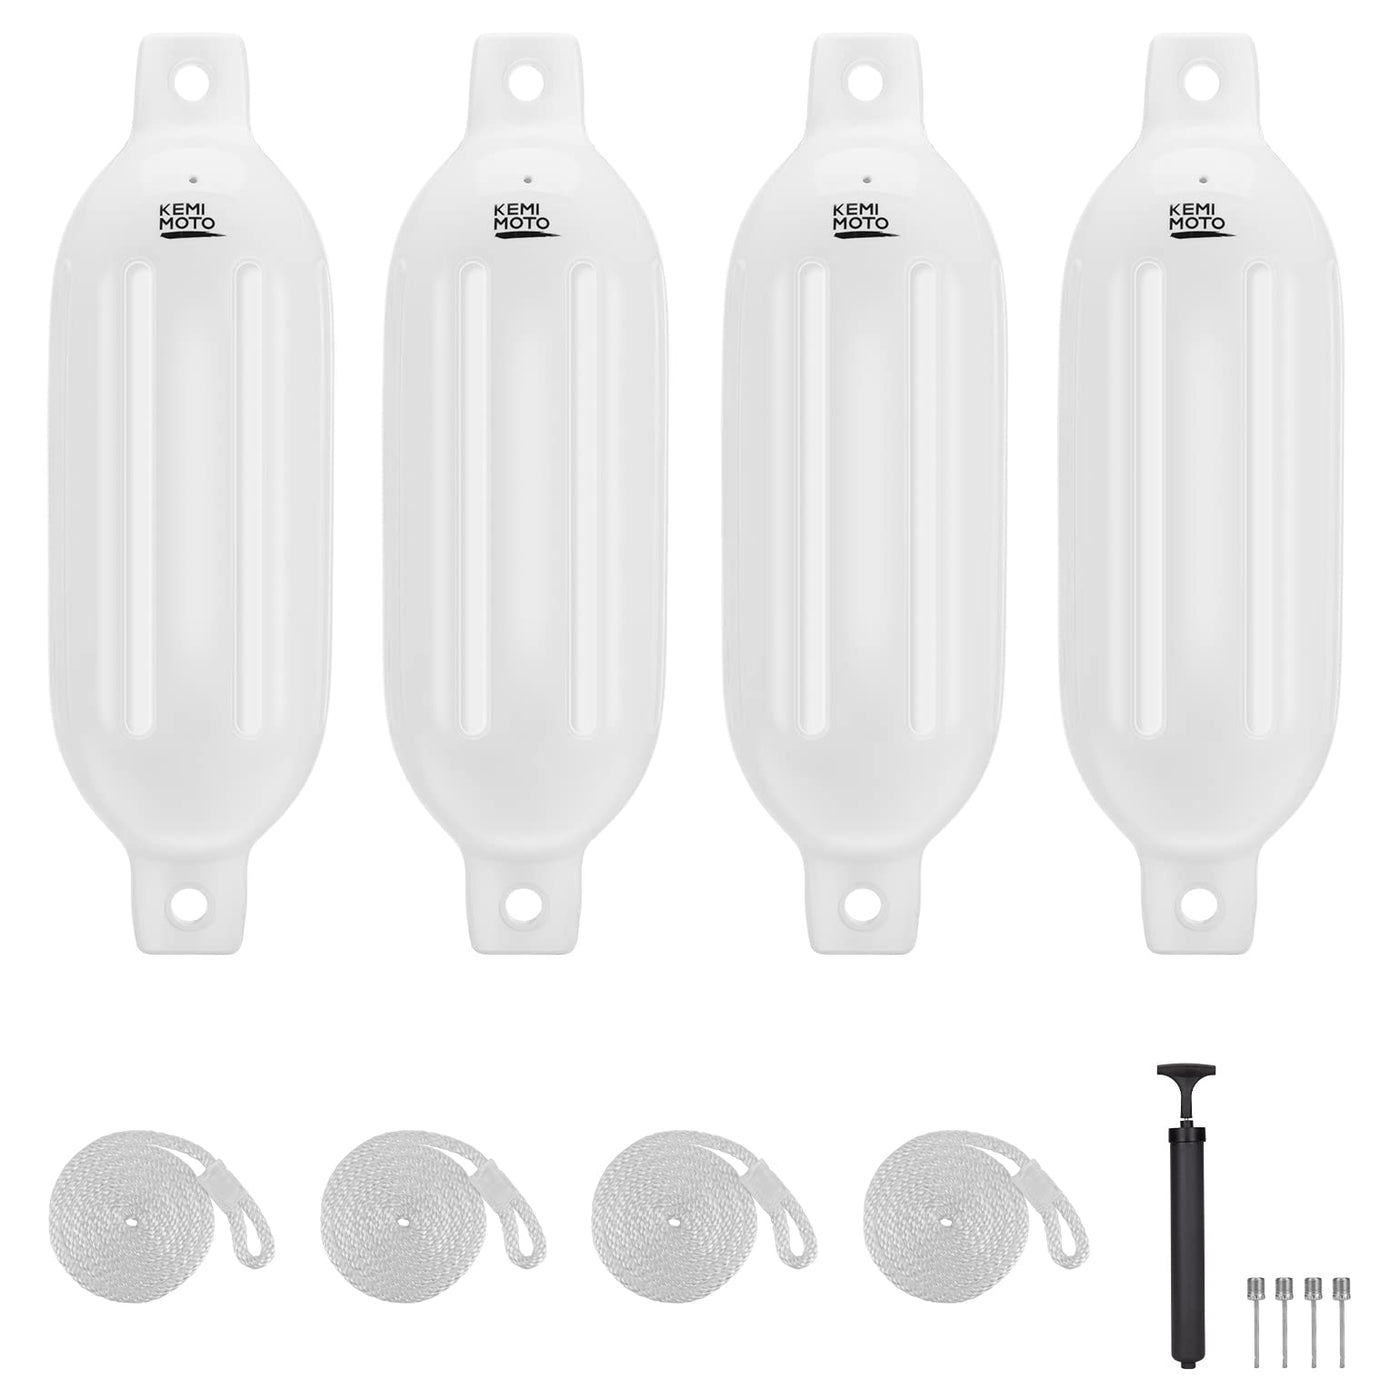 4 Packs Inflatable Boat Fenders Bumpers For 15-35ft Boat - Kemimoto